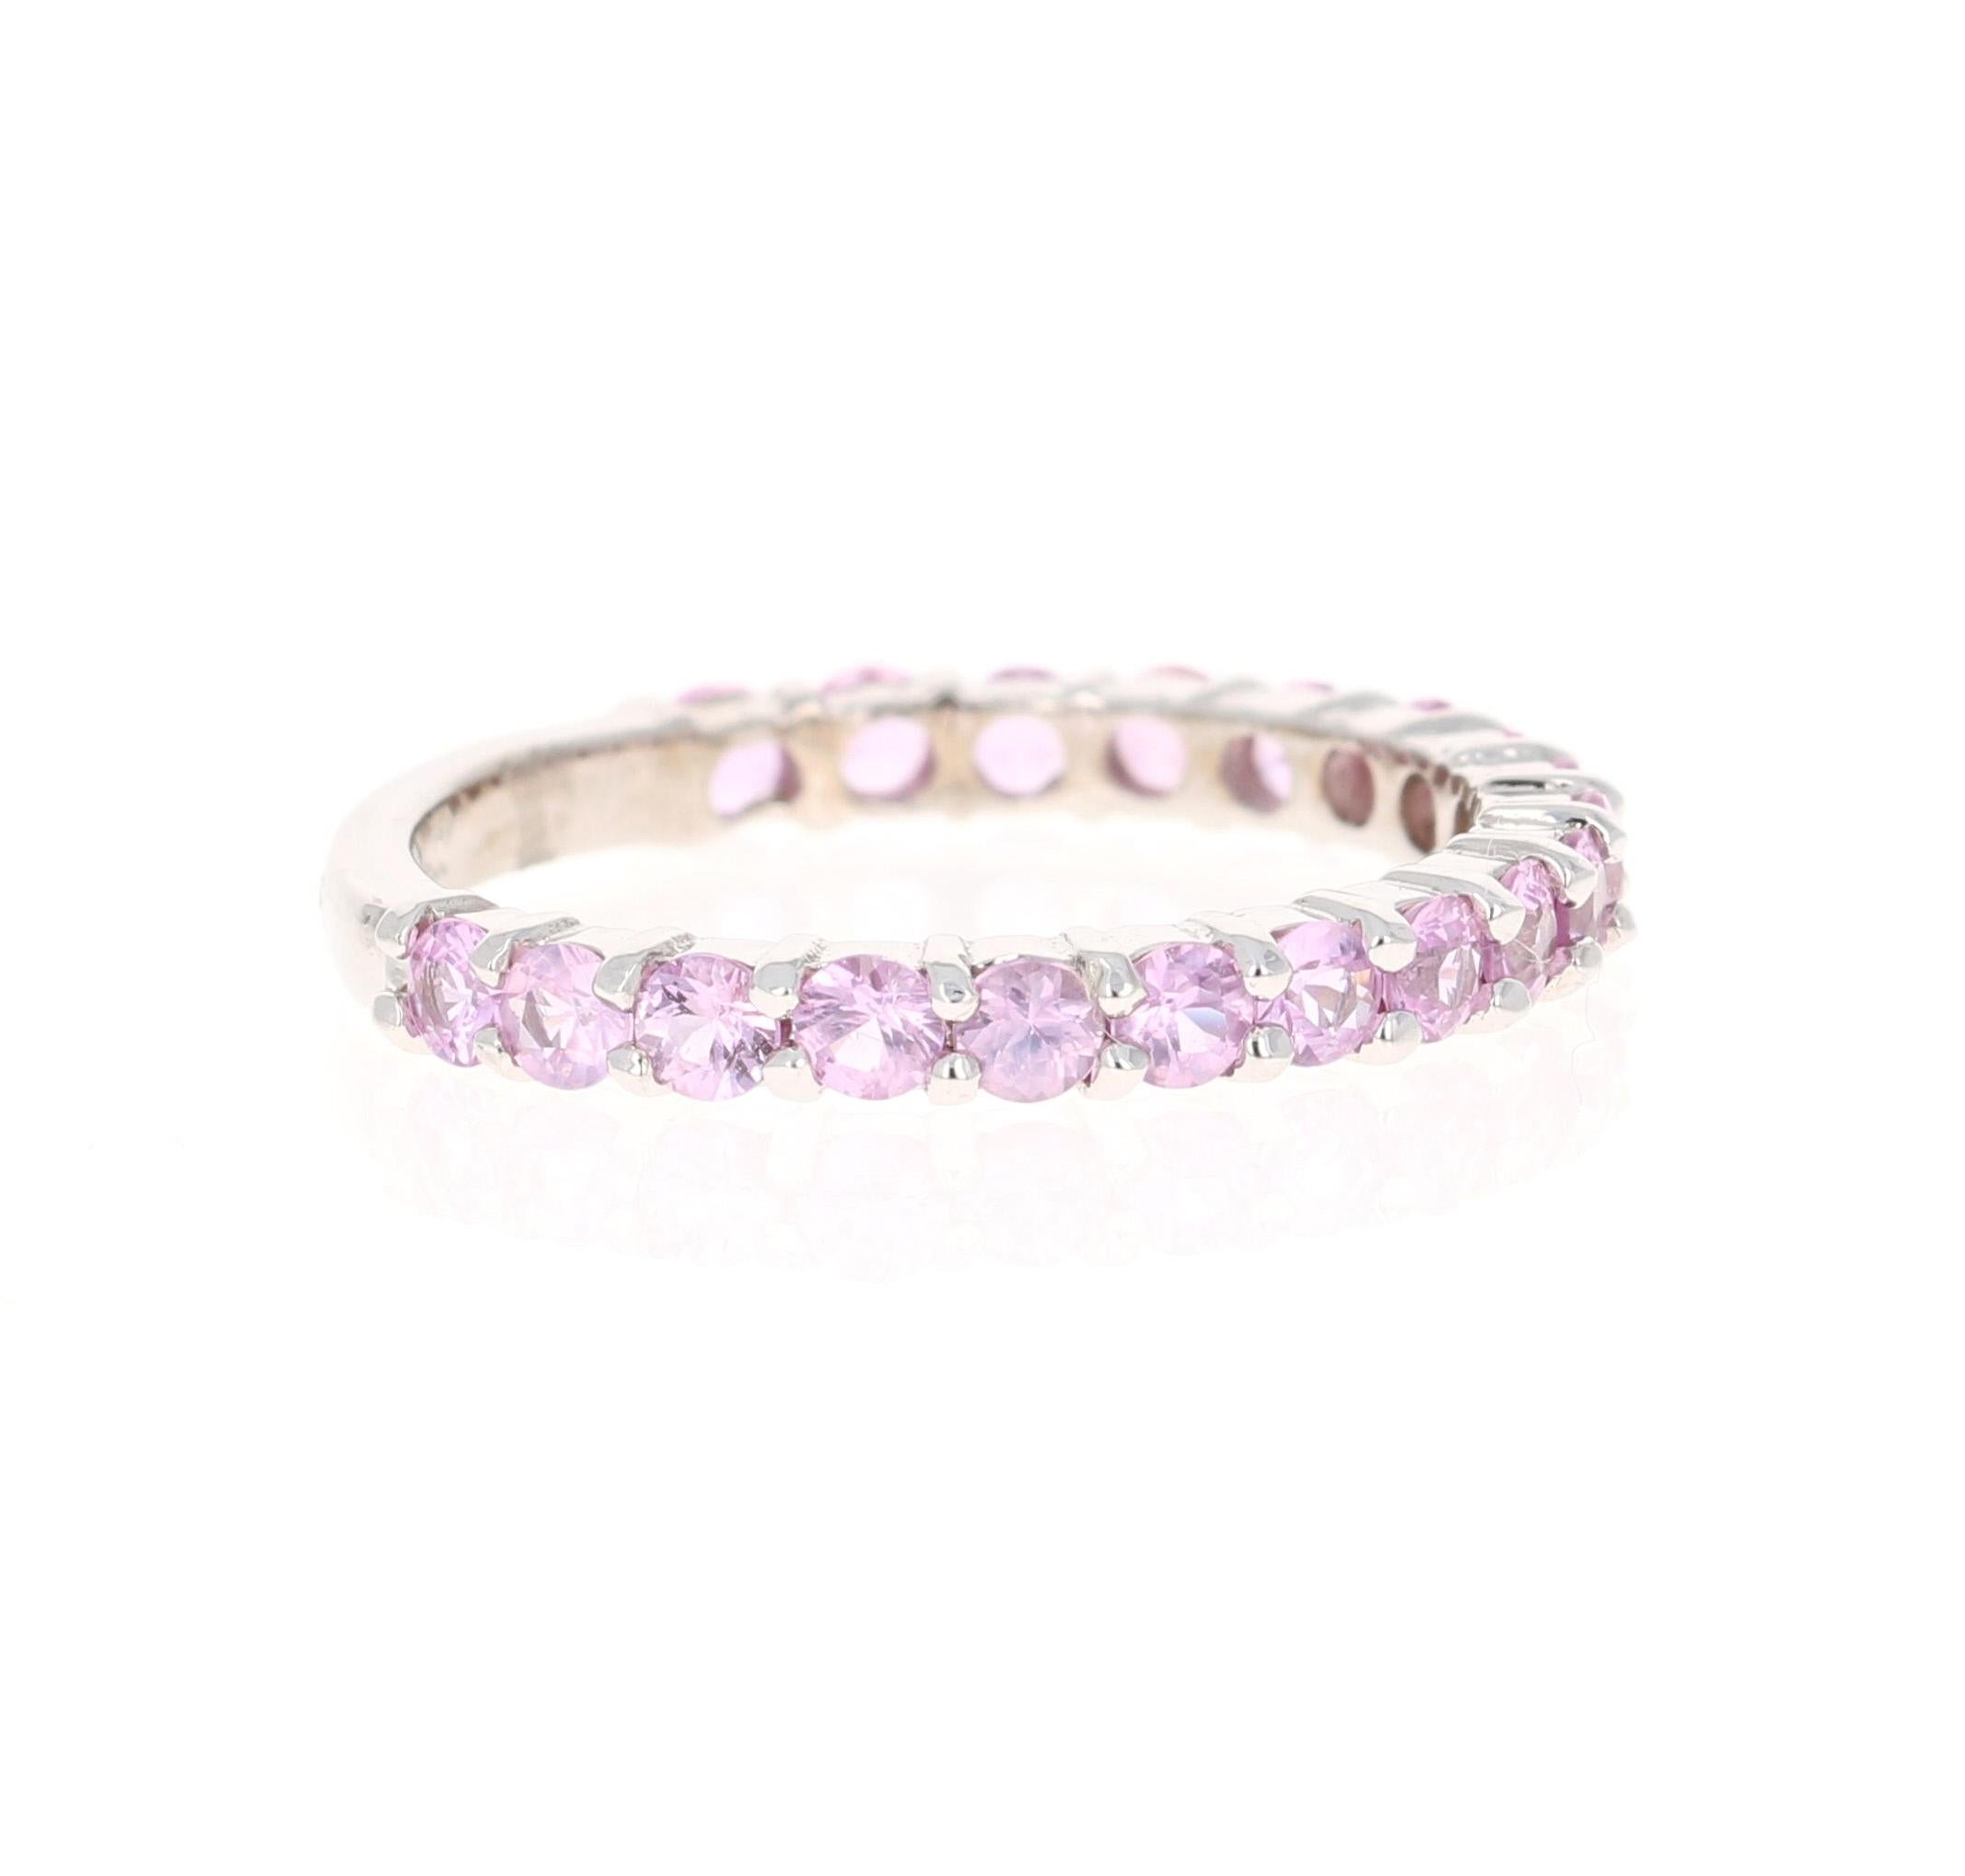 This ring has 19 Pink Sapphires that weigh 1.41 Carats. 

Crafted in 14 Karat White Gold and weighs approximately 2.1 grams 

The ring is a size 7 and can be re-sized at no additional charge!